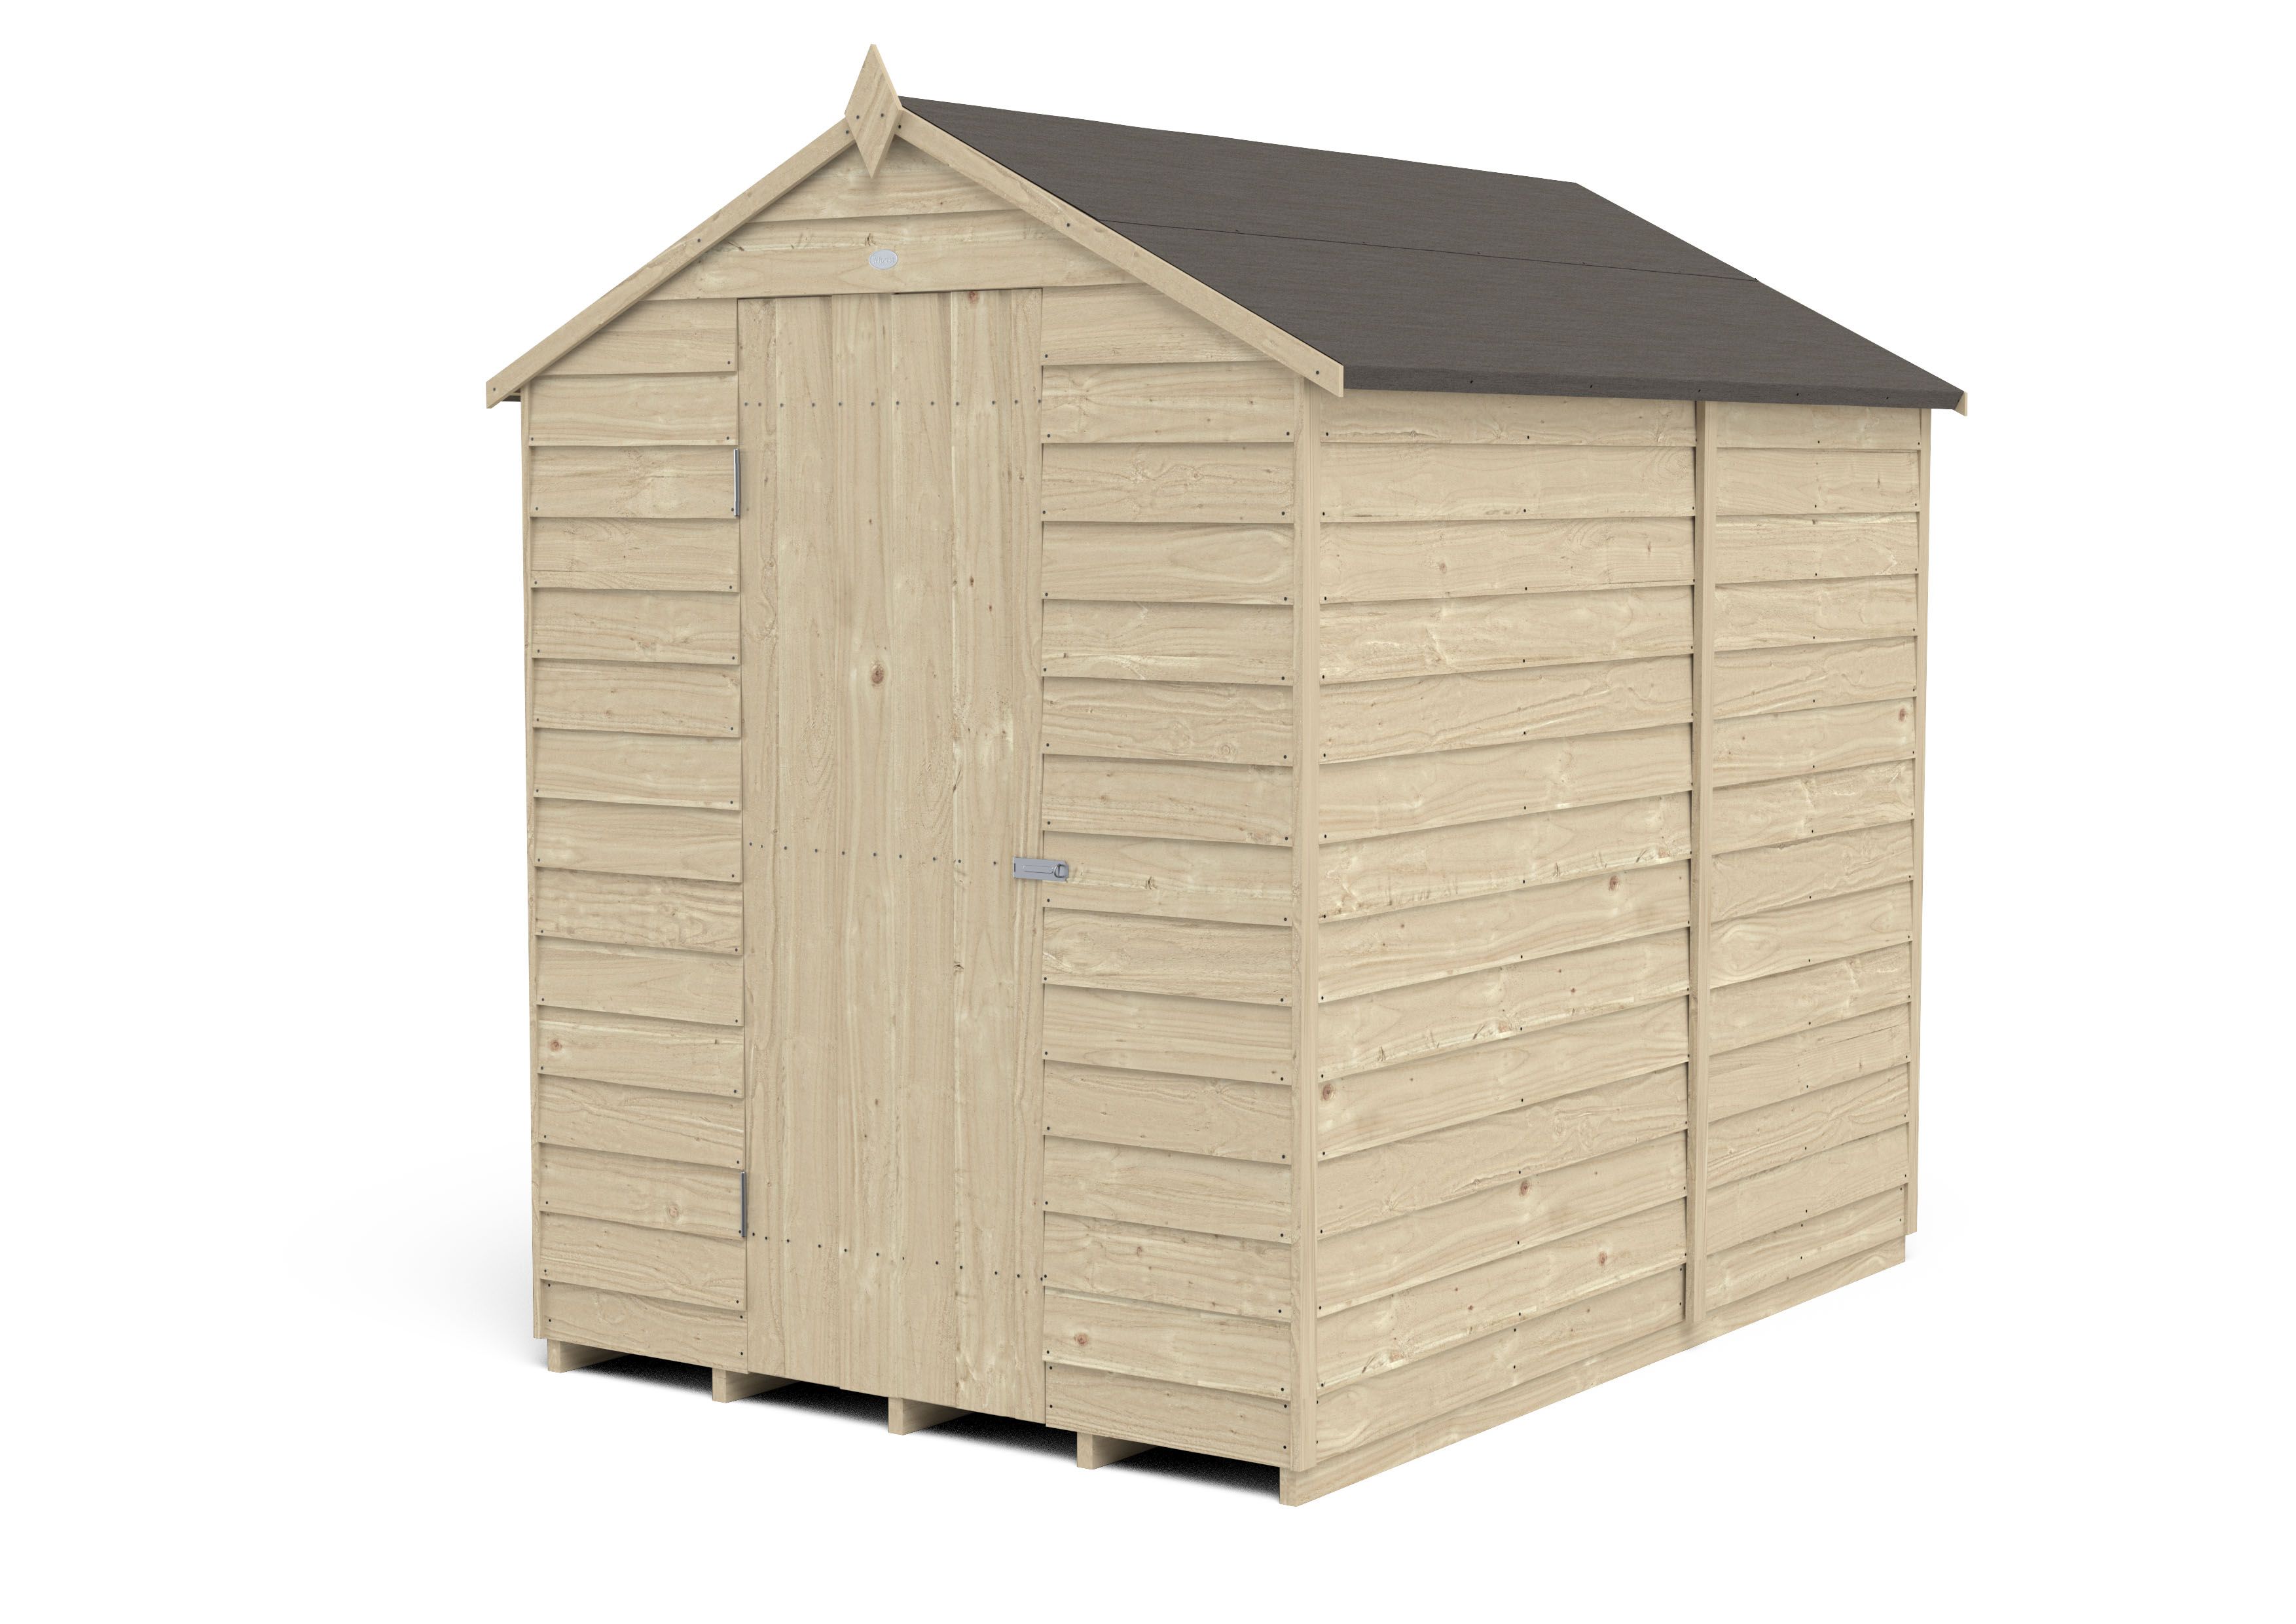 Forest Garden Overlap 7x5 ft Apex Wooden Pressure treated Shed with floor (Base included)